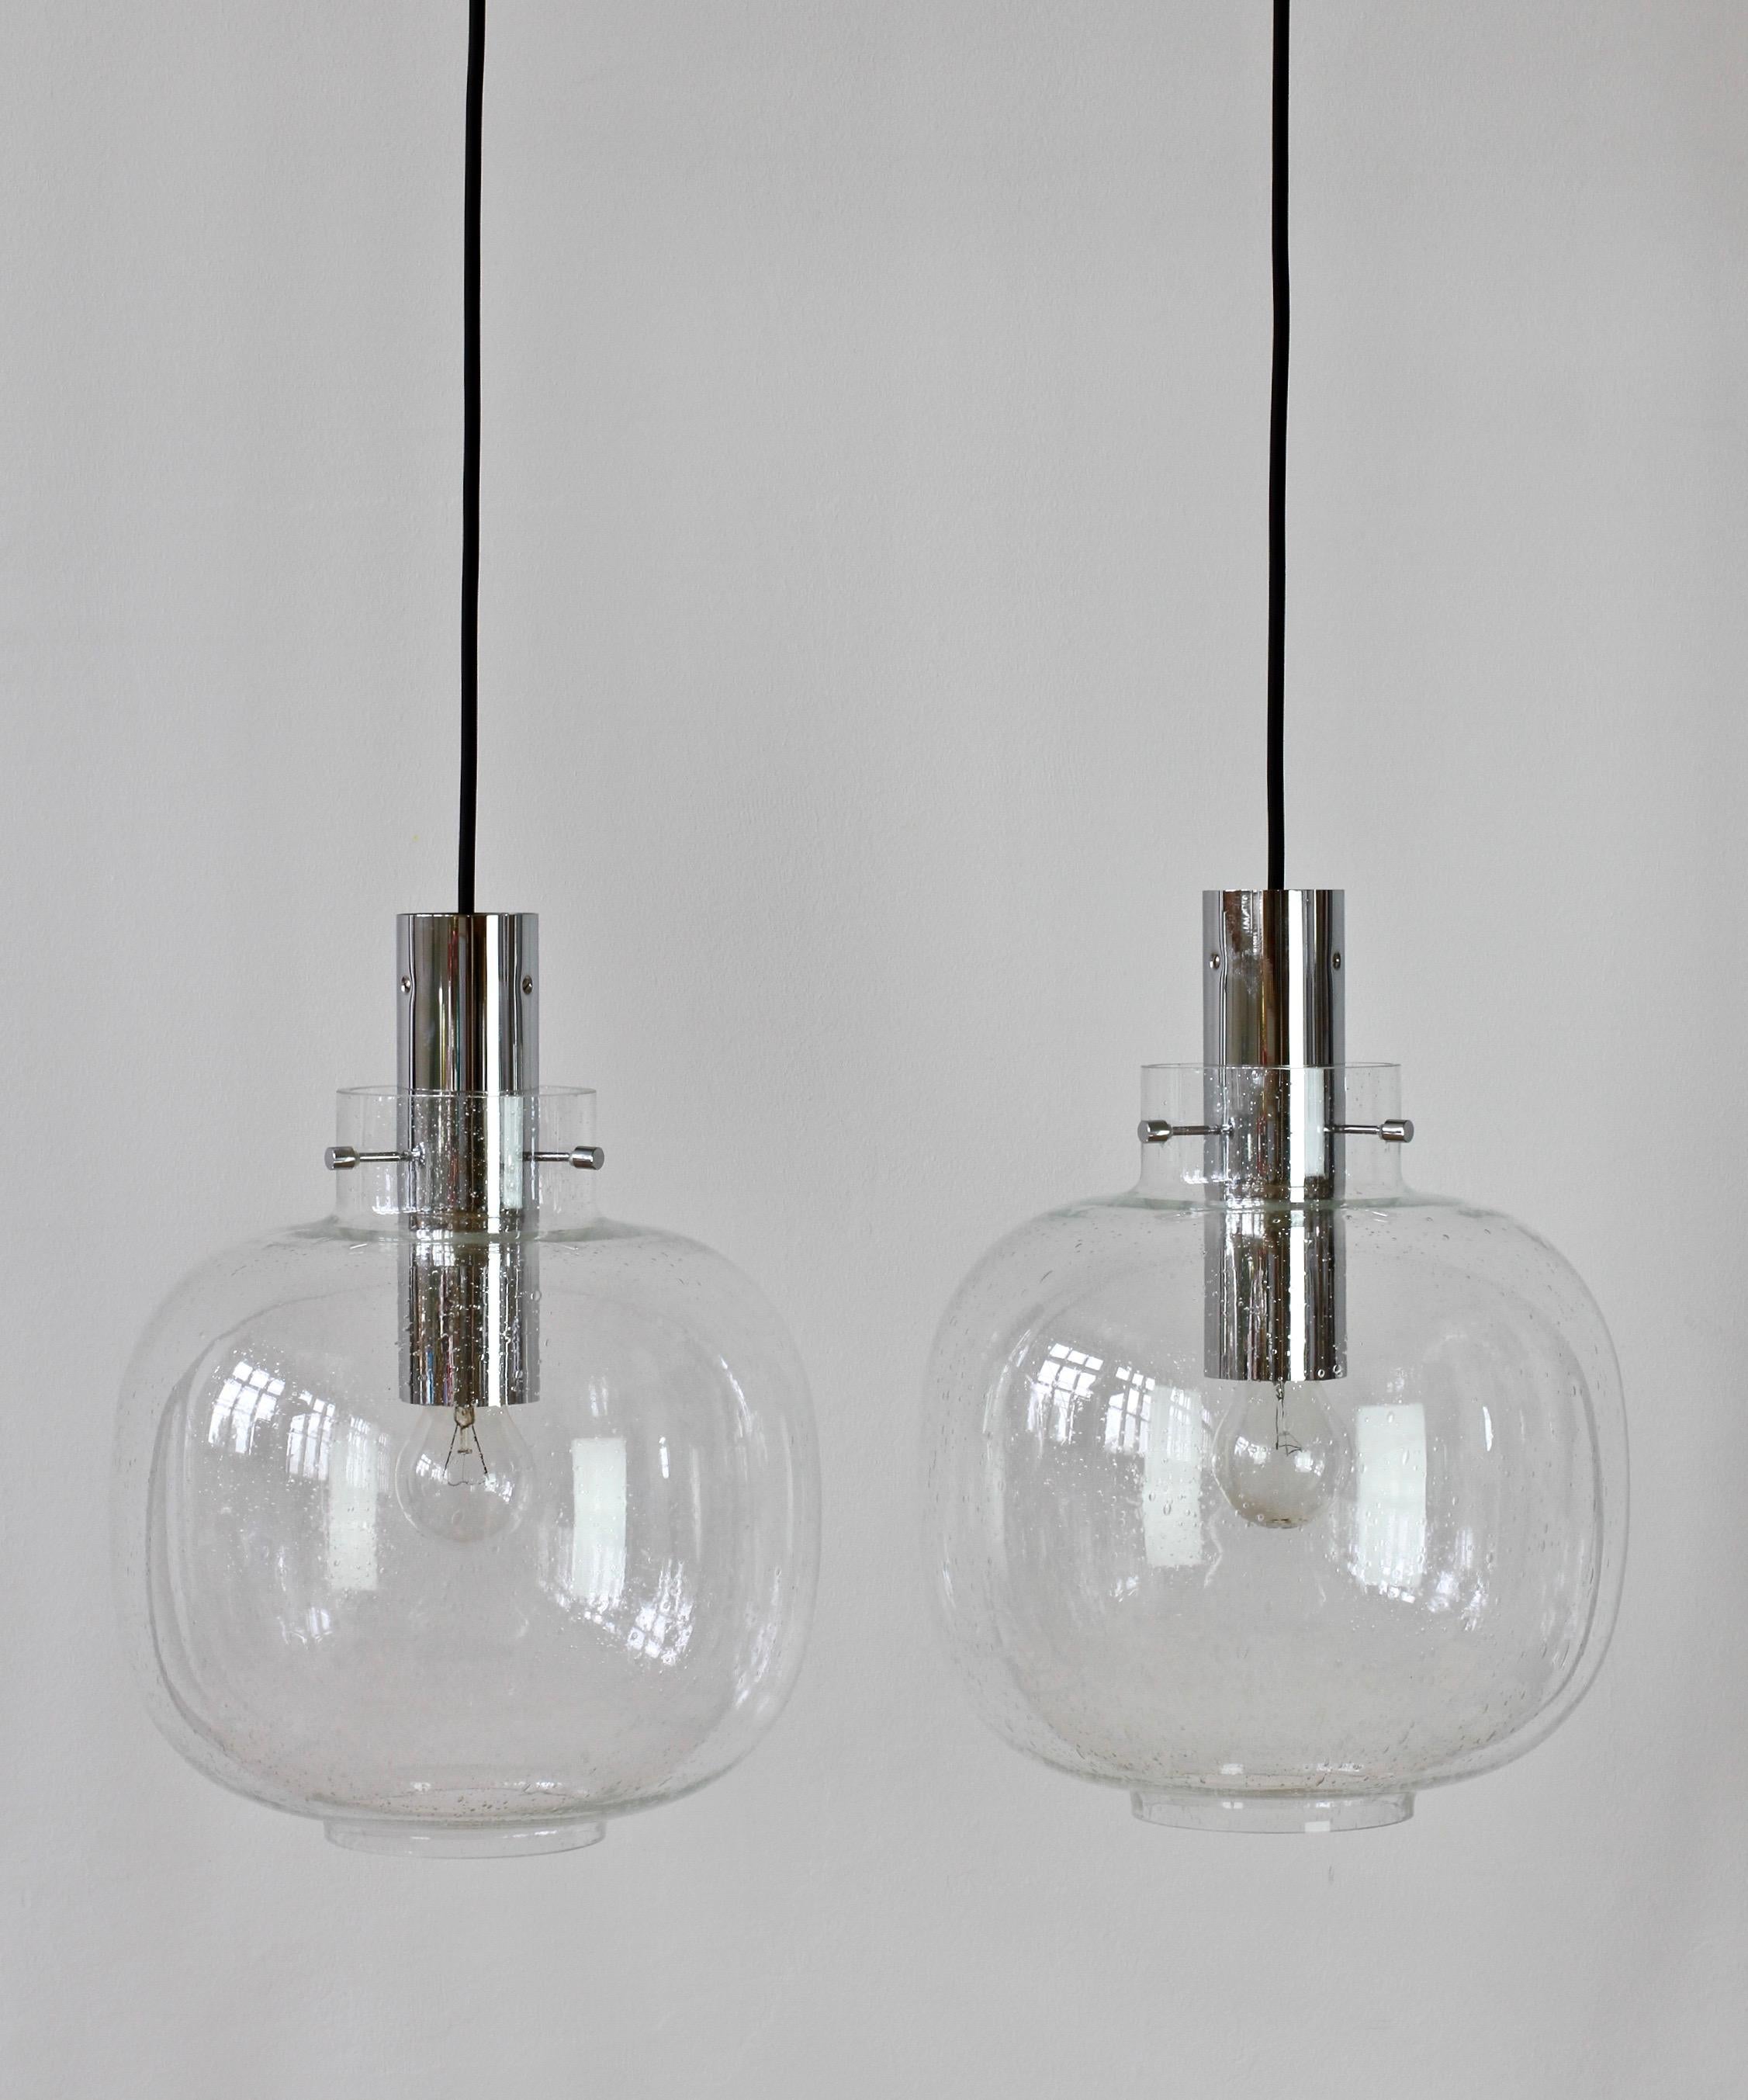 Large vintage pair of German made late Mid-Century Modern wall or ceiling flush mount lights produced by Glashütte Limburg, circa 1975. Featuring a round domed mouth blown bubble glass shade and polished chrome mounts or hardware. Being mouth blown